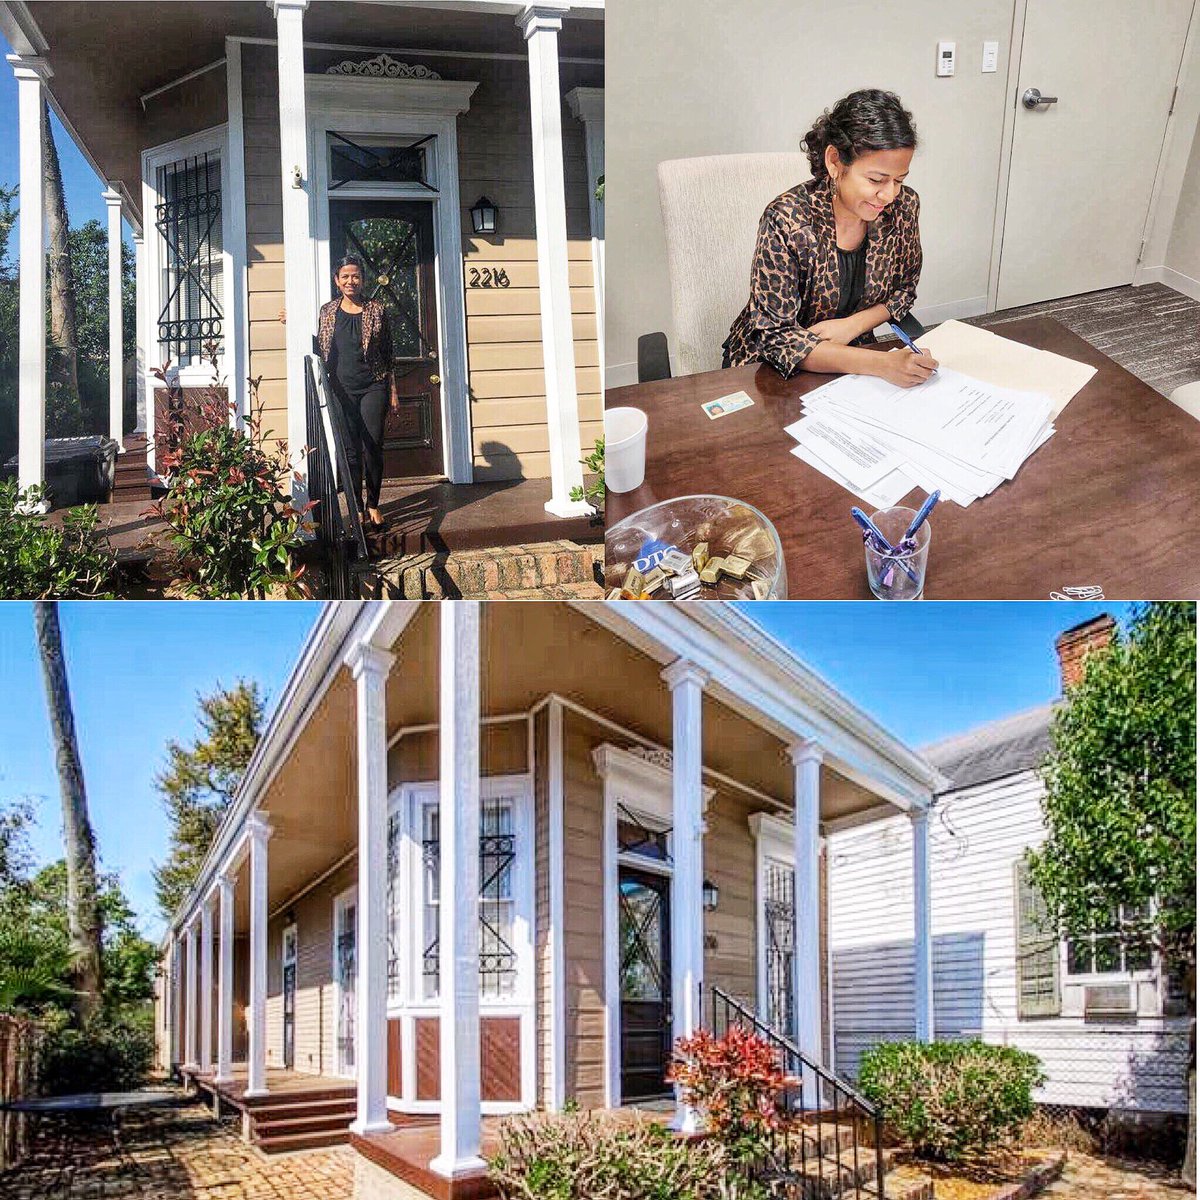 #SOLD! Join us in congratulating #firsttimehomebuyer, Nithya! This beautiful #historicproperty is ready to be called #home.

Special shoutout to our senior realtor William “Buddy” King, @DeltaTitleCorp and @MyBXS on this successful closing! ⚜️ #NOLA #NOLARealEstate